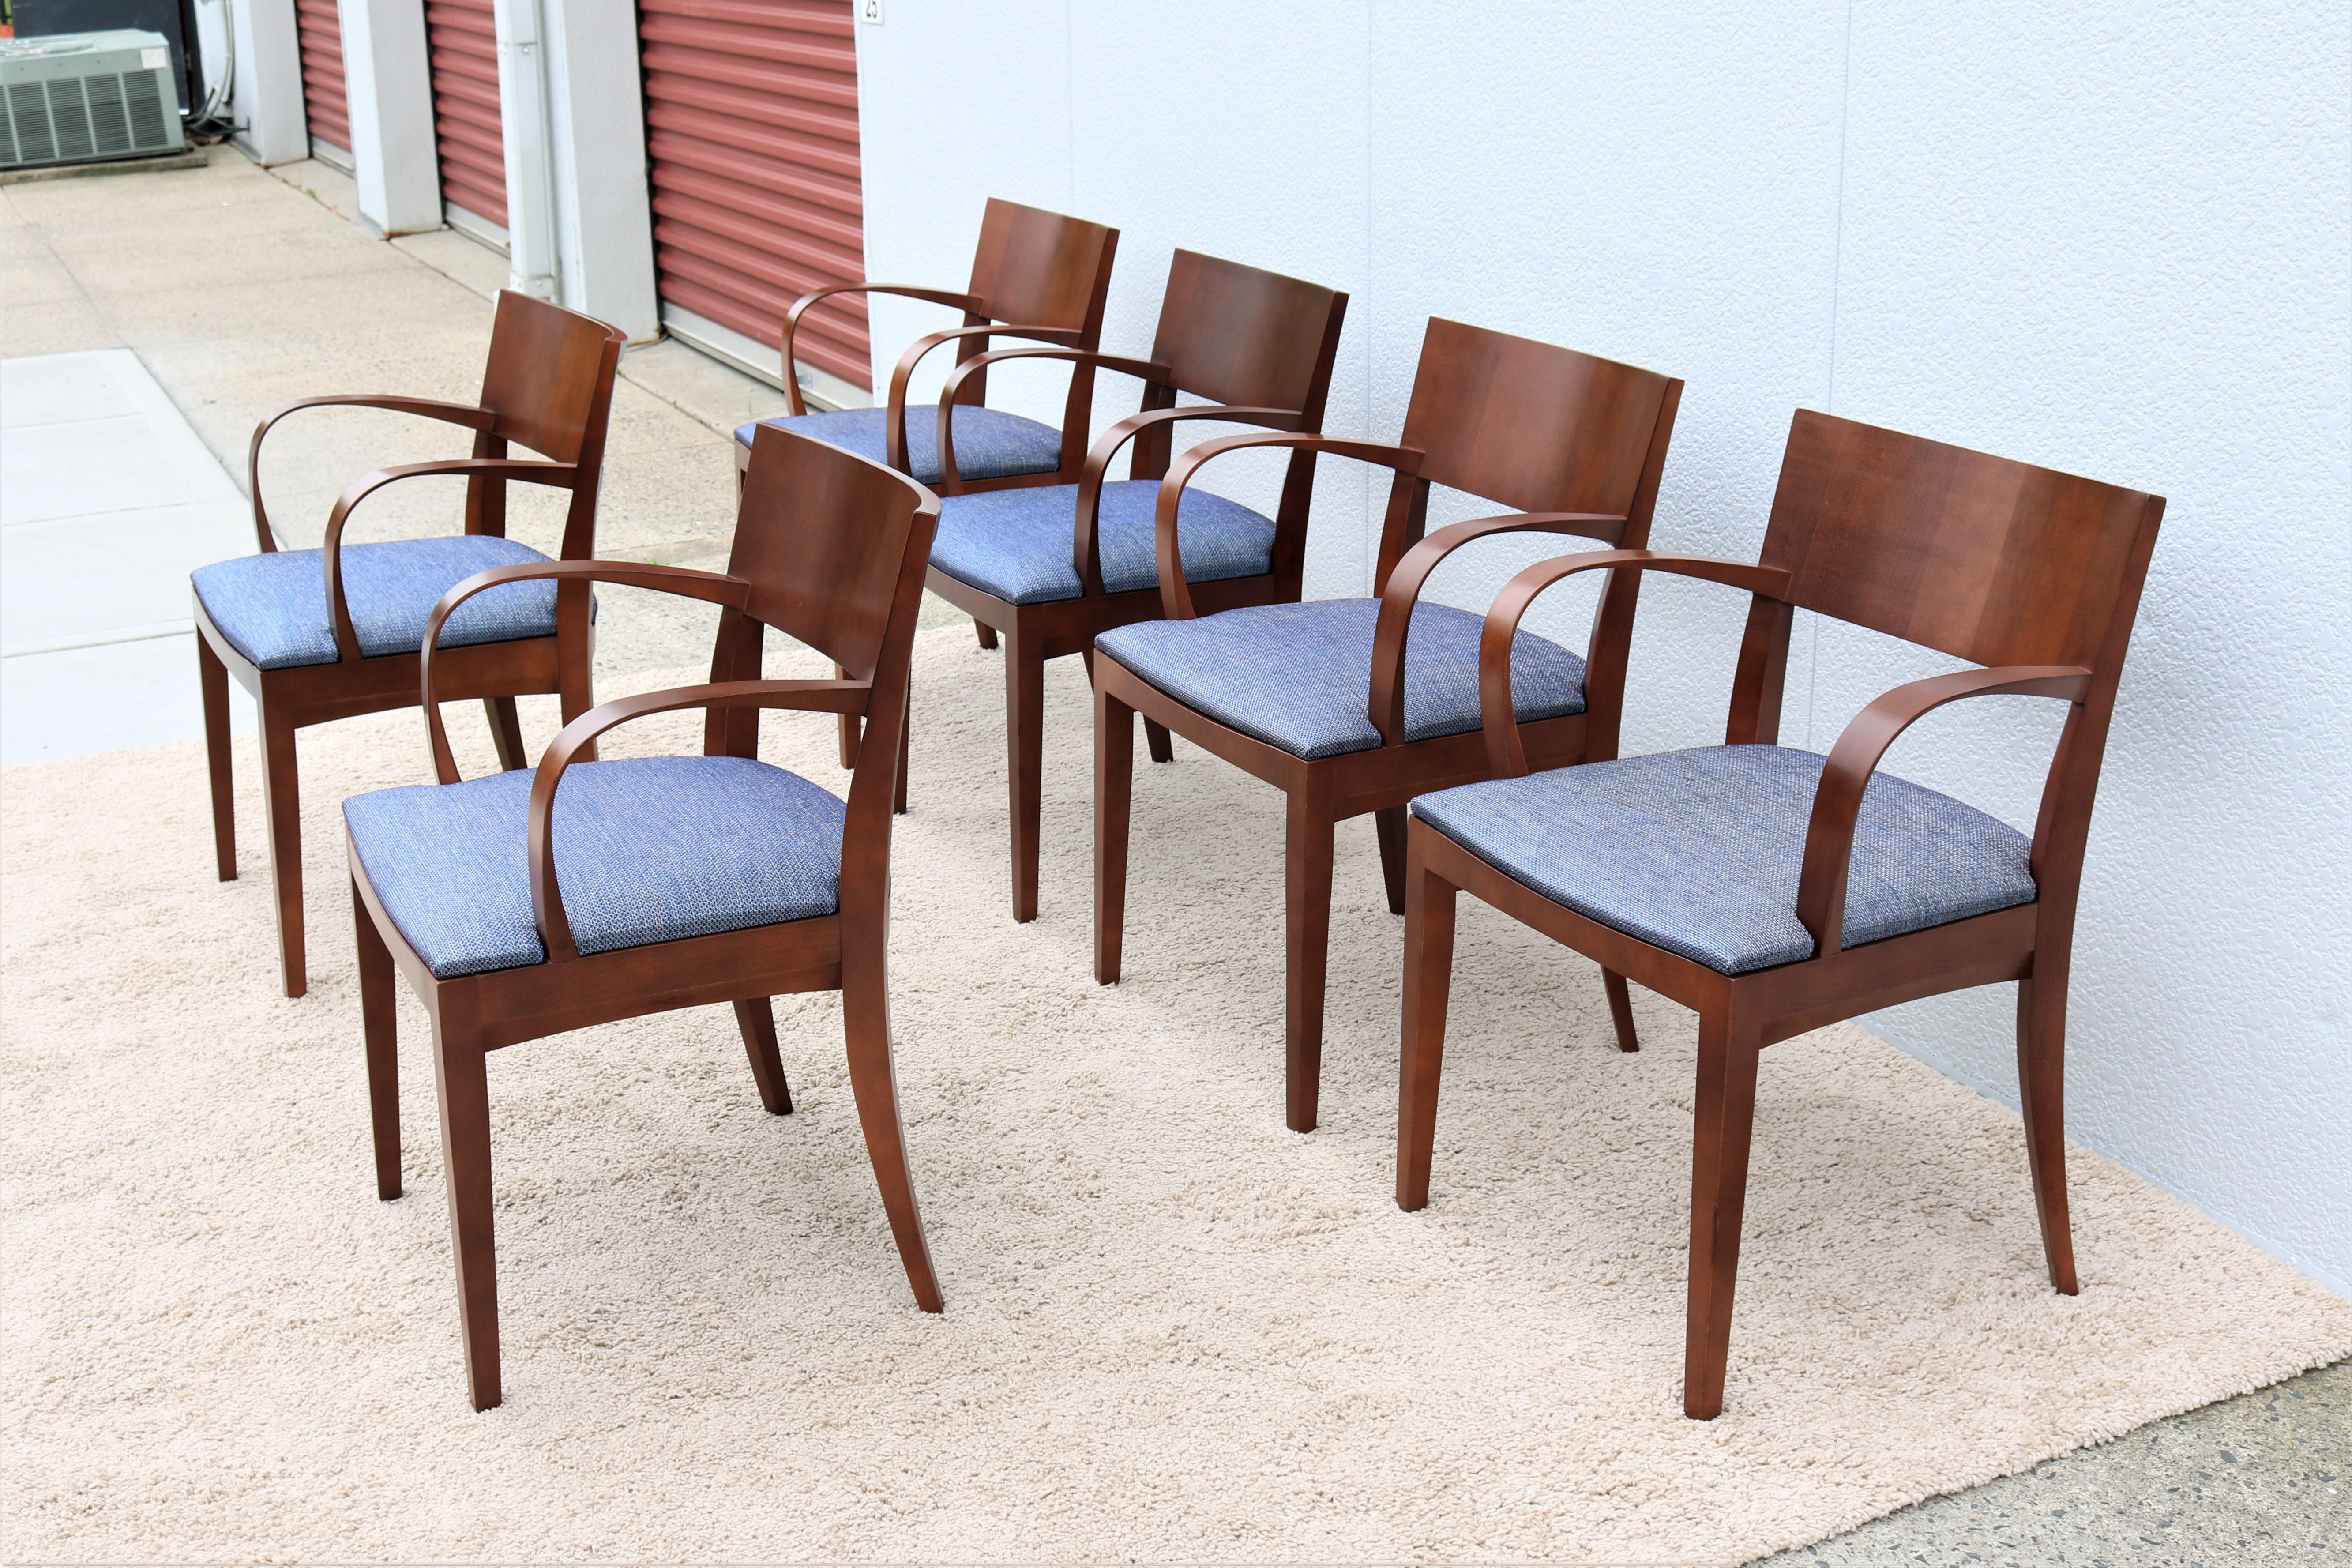 The Crinion wood side chair is elegant with soft lines and pleasing proportions.
The well-constructed frame and ribbon-candy arms are engaging from every angle.
Great for home dining room or guest reception areas and private office.

Please note the